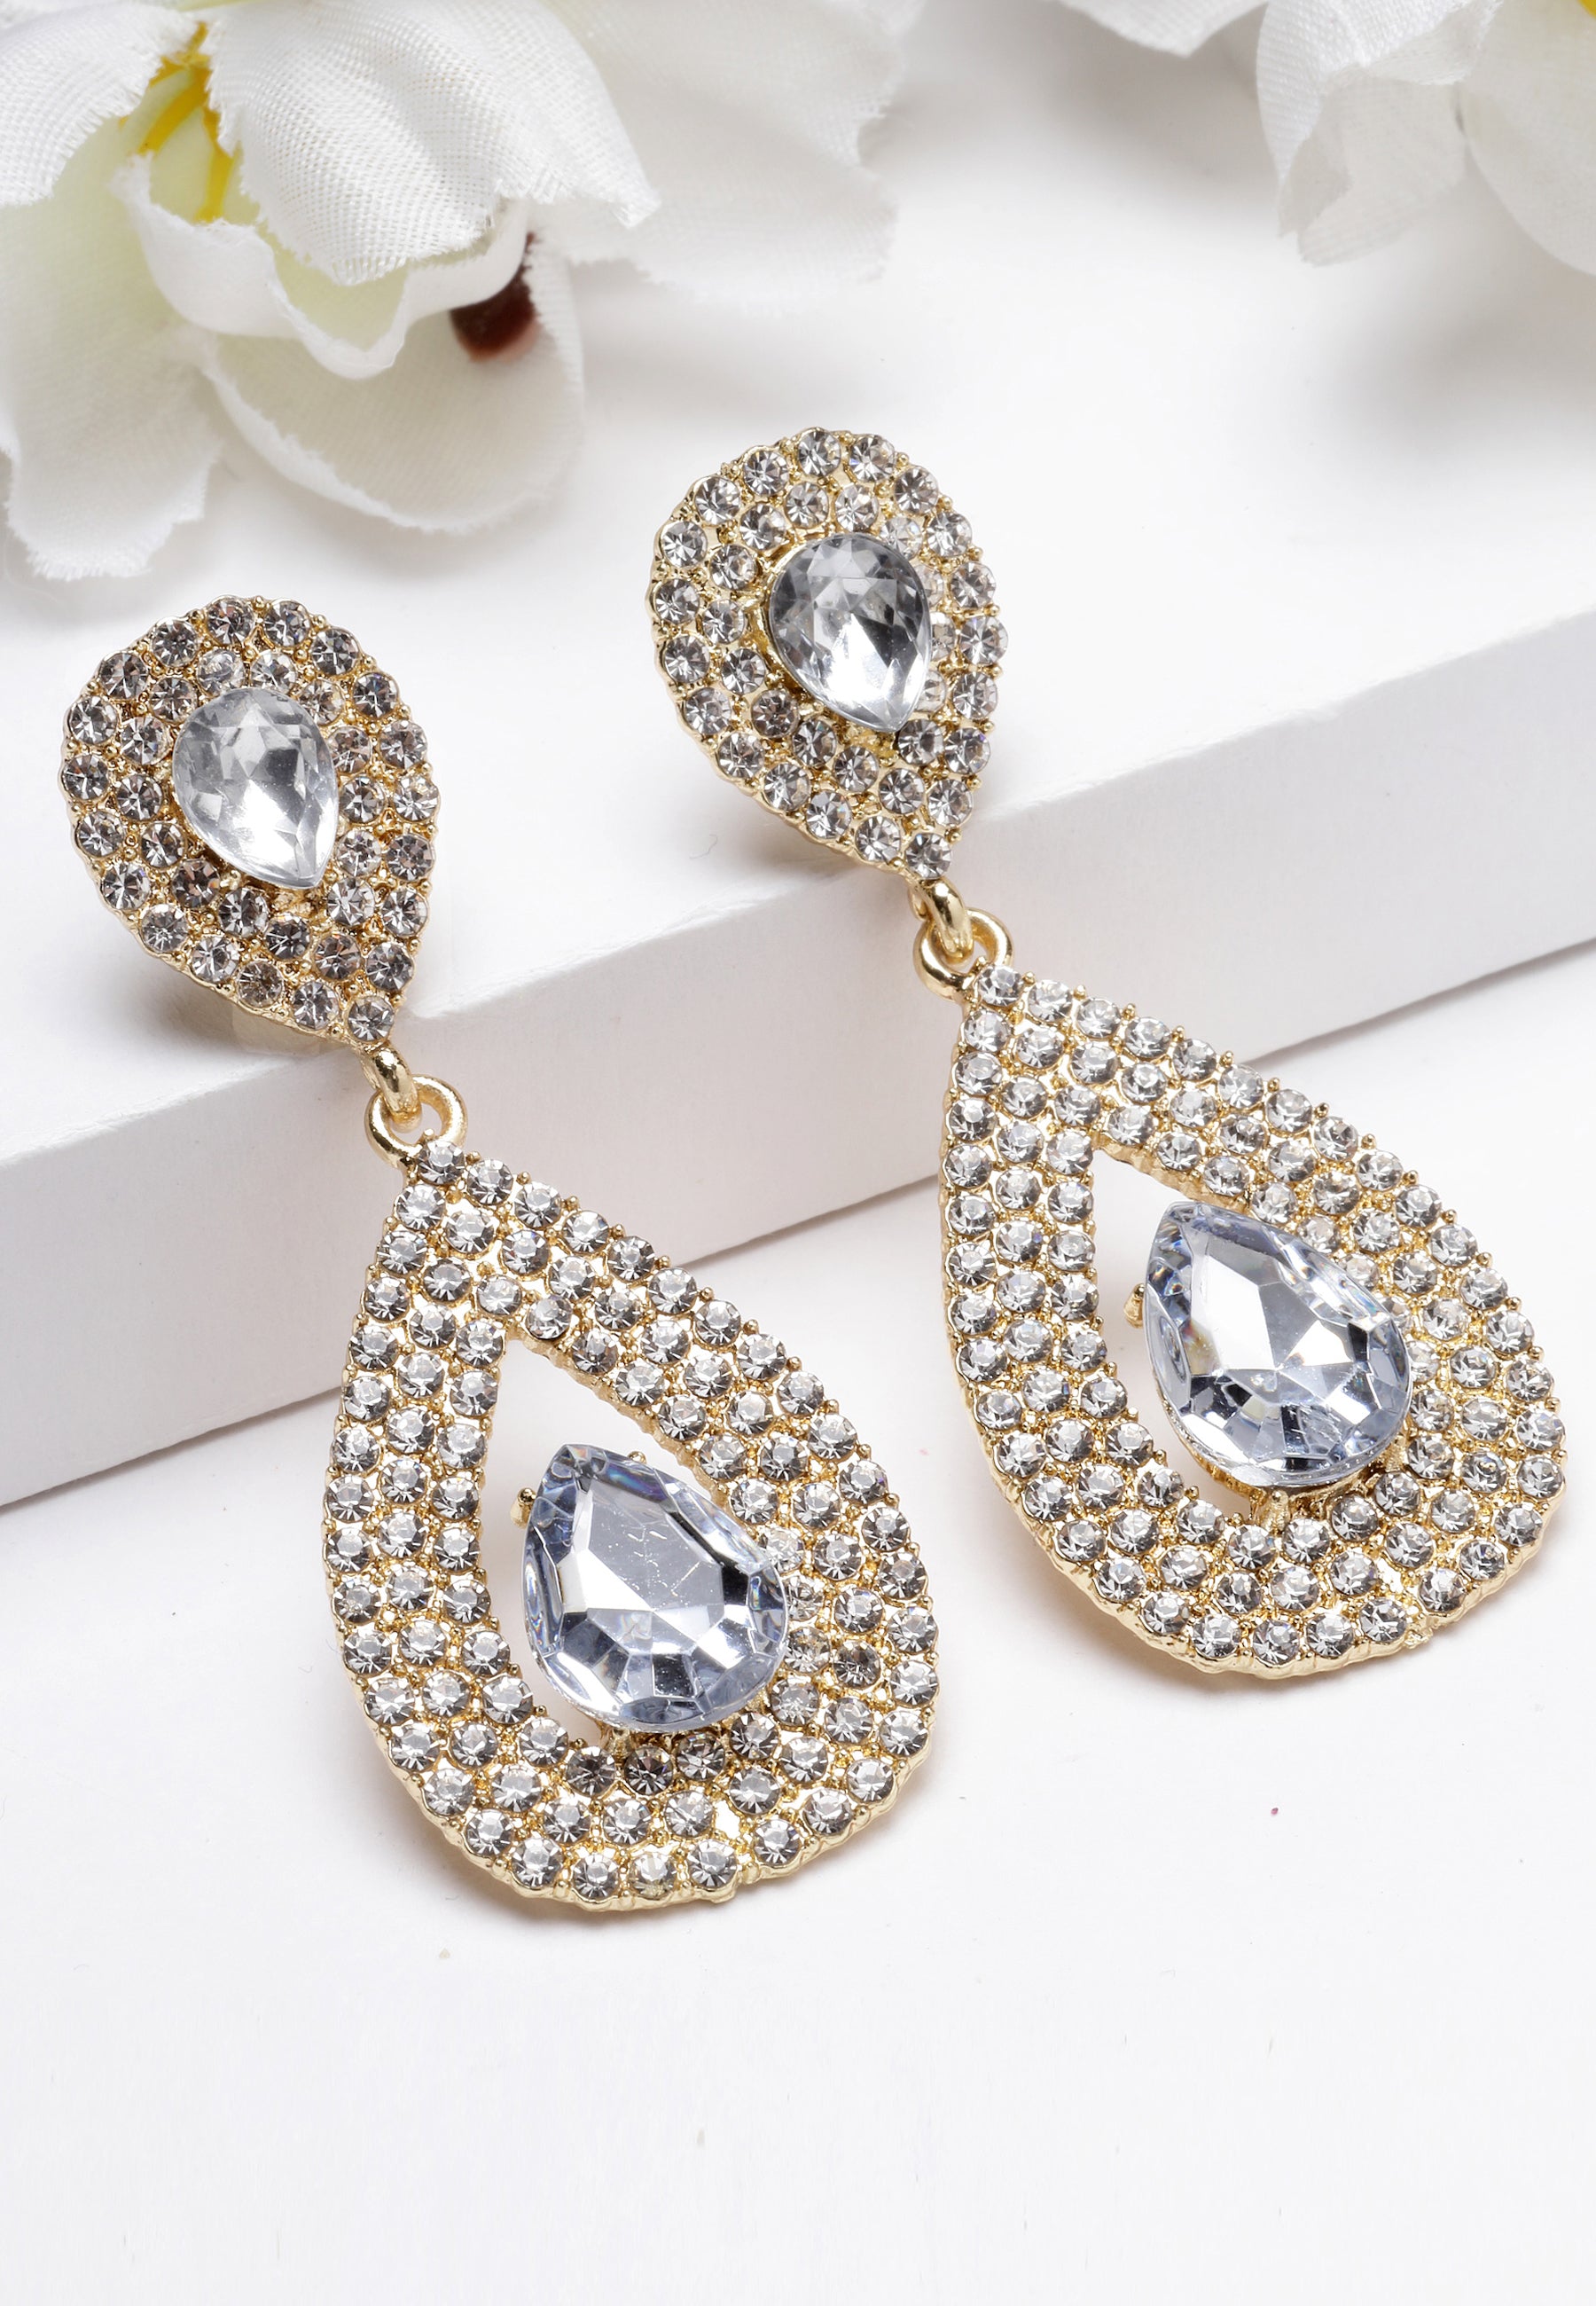 Gold-Colored Water Droplet Crystal Earrings